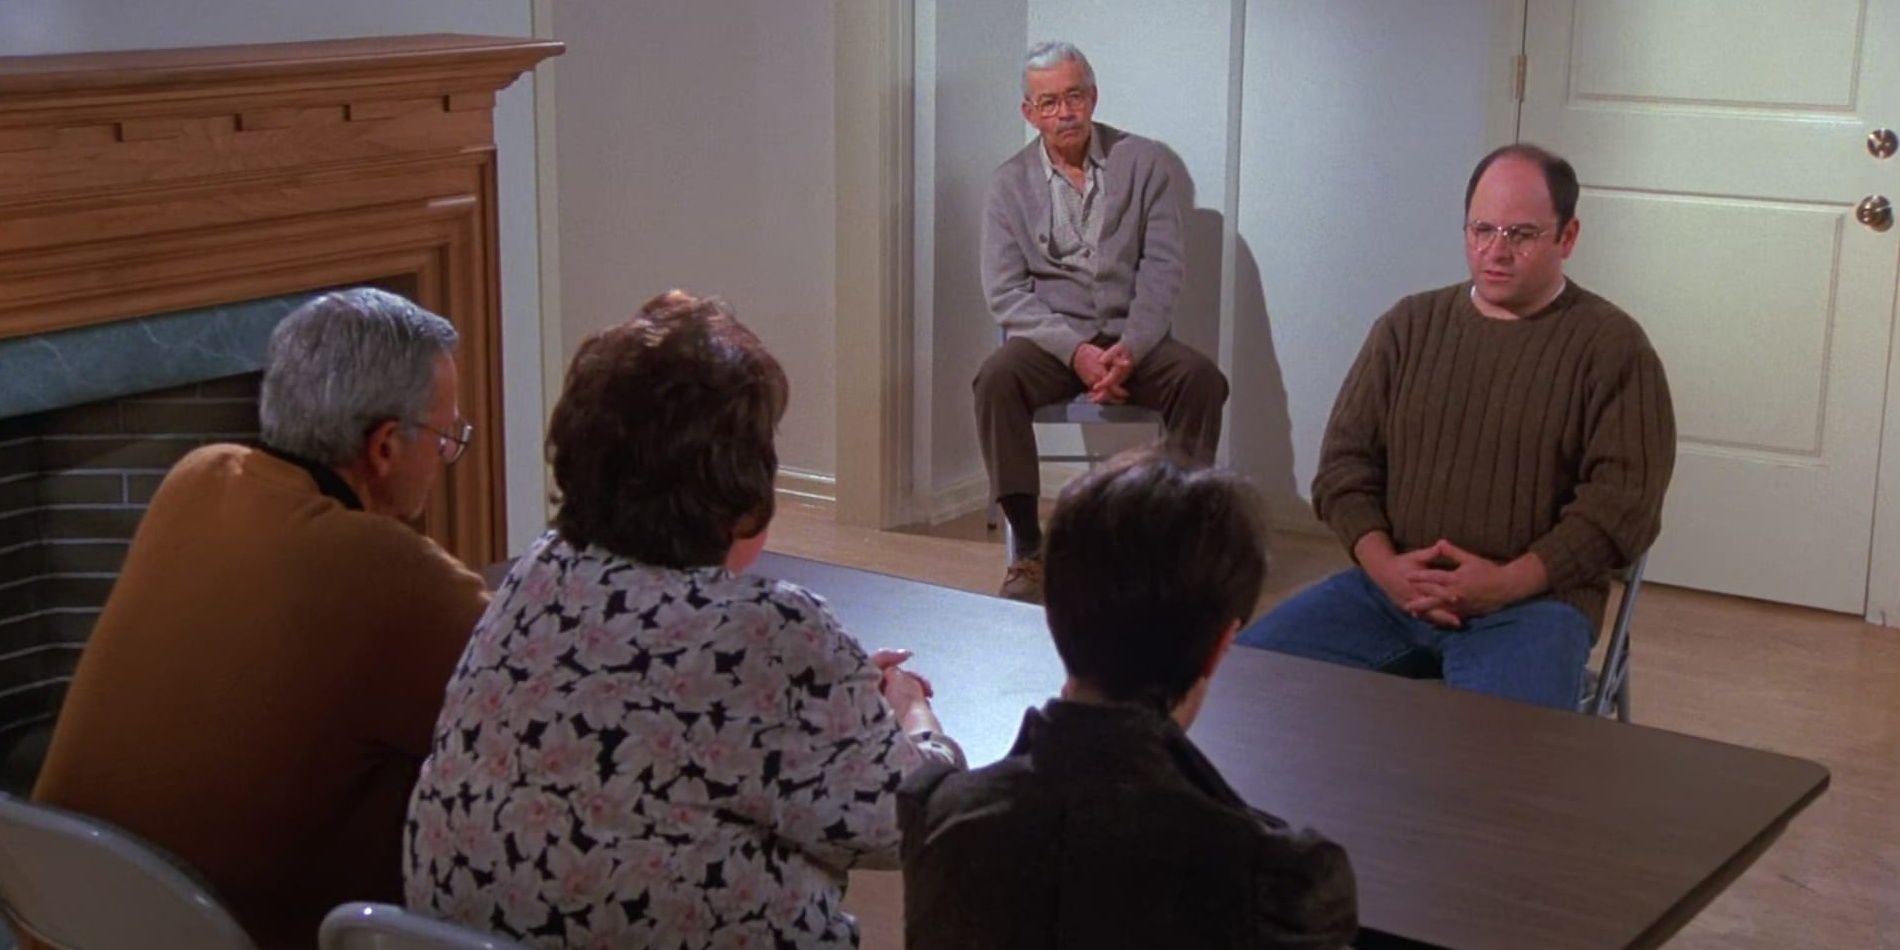 George speaking to the board of an apartment building in Seinfeld - The Andrea Doria